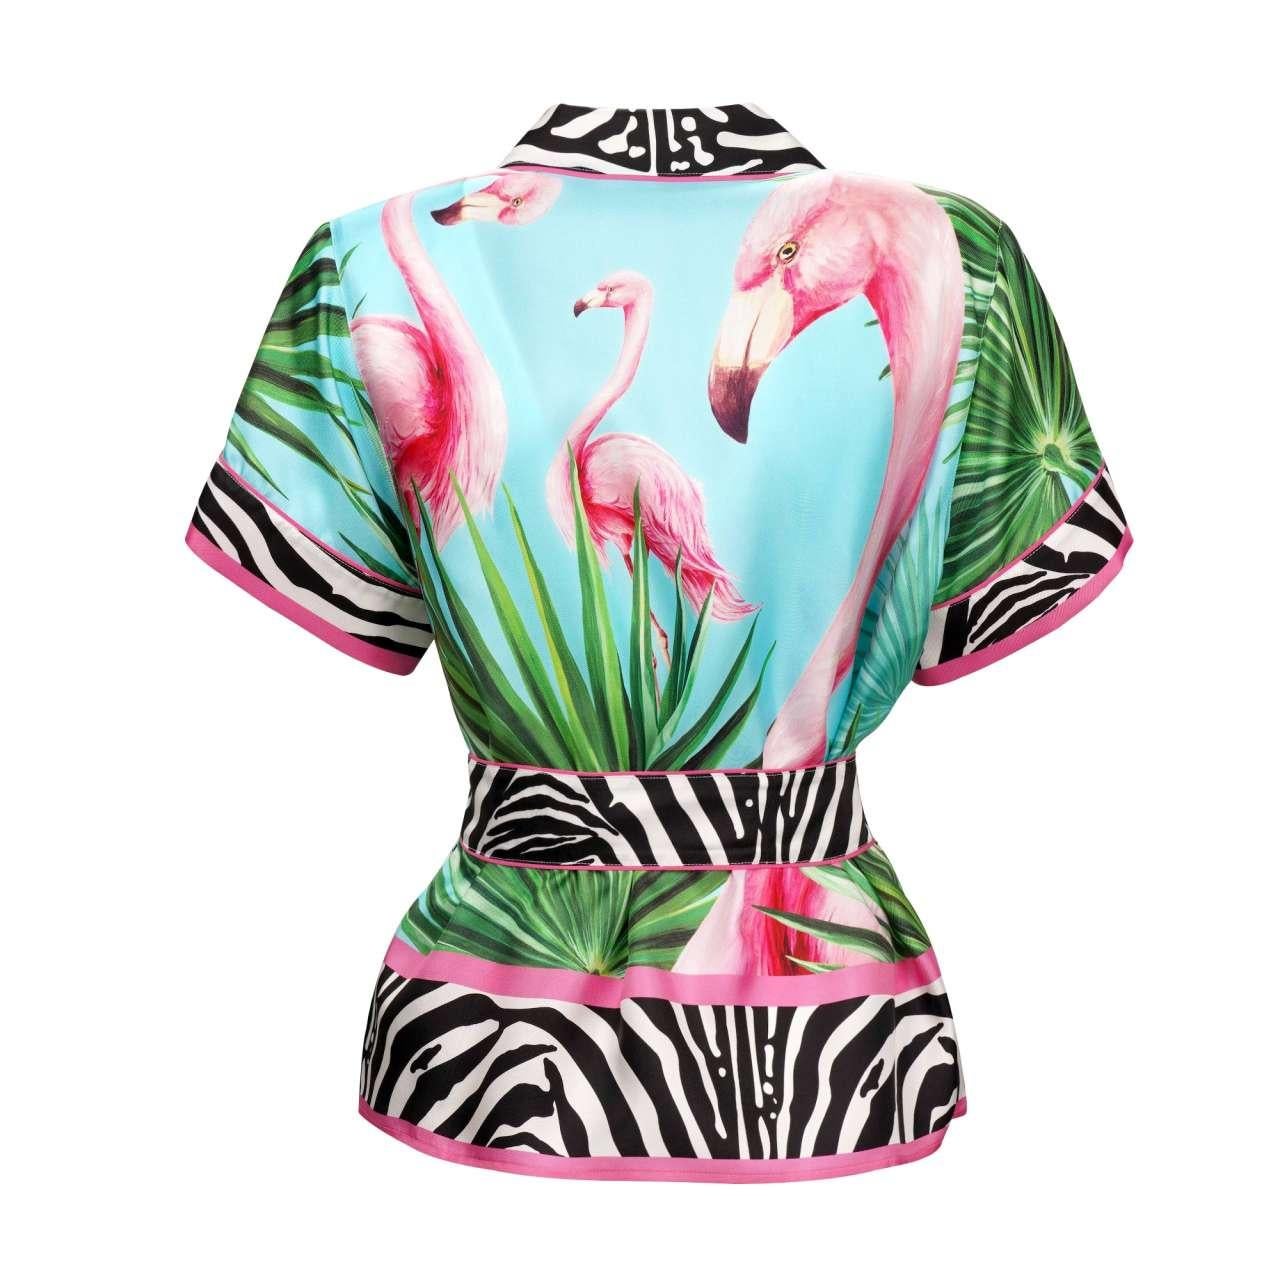 D&G - DJ Khaled Silk Flamingo Zebra Shirt Blouse with Sunglasses and CD 48 In Excellent Condition For Sale In Erkrath, DE